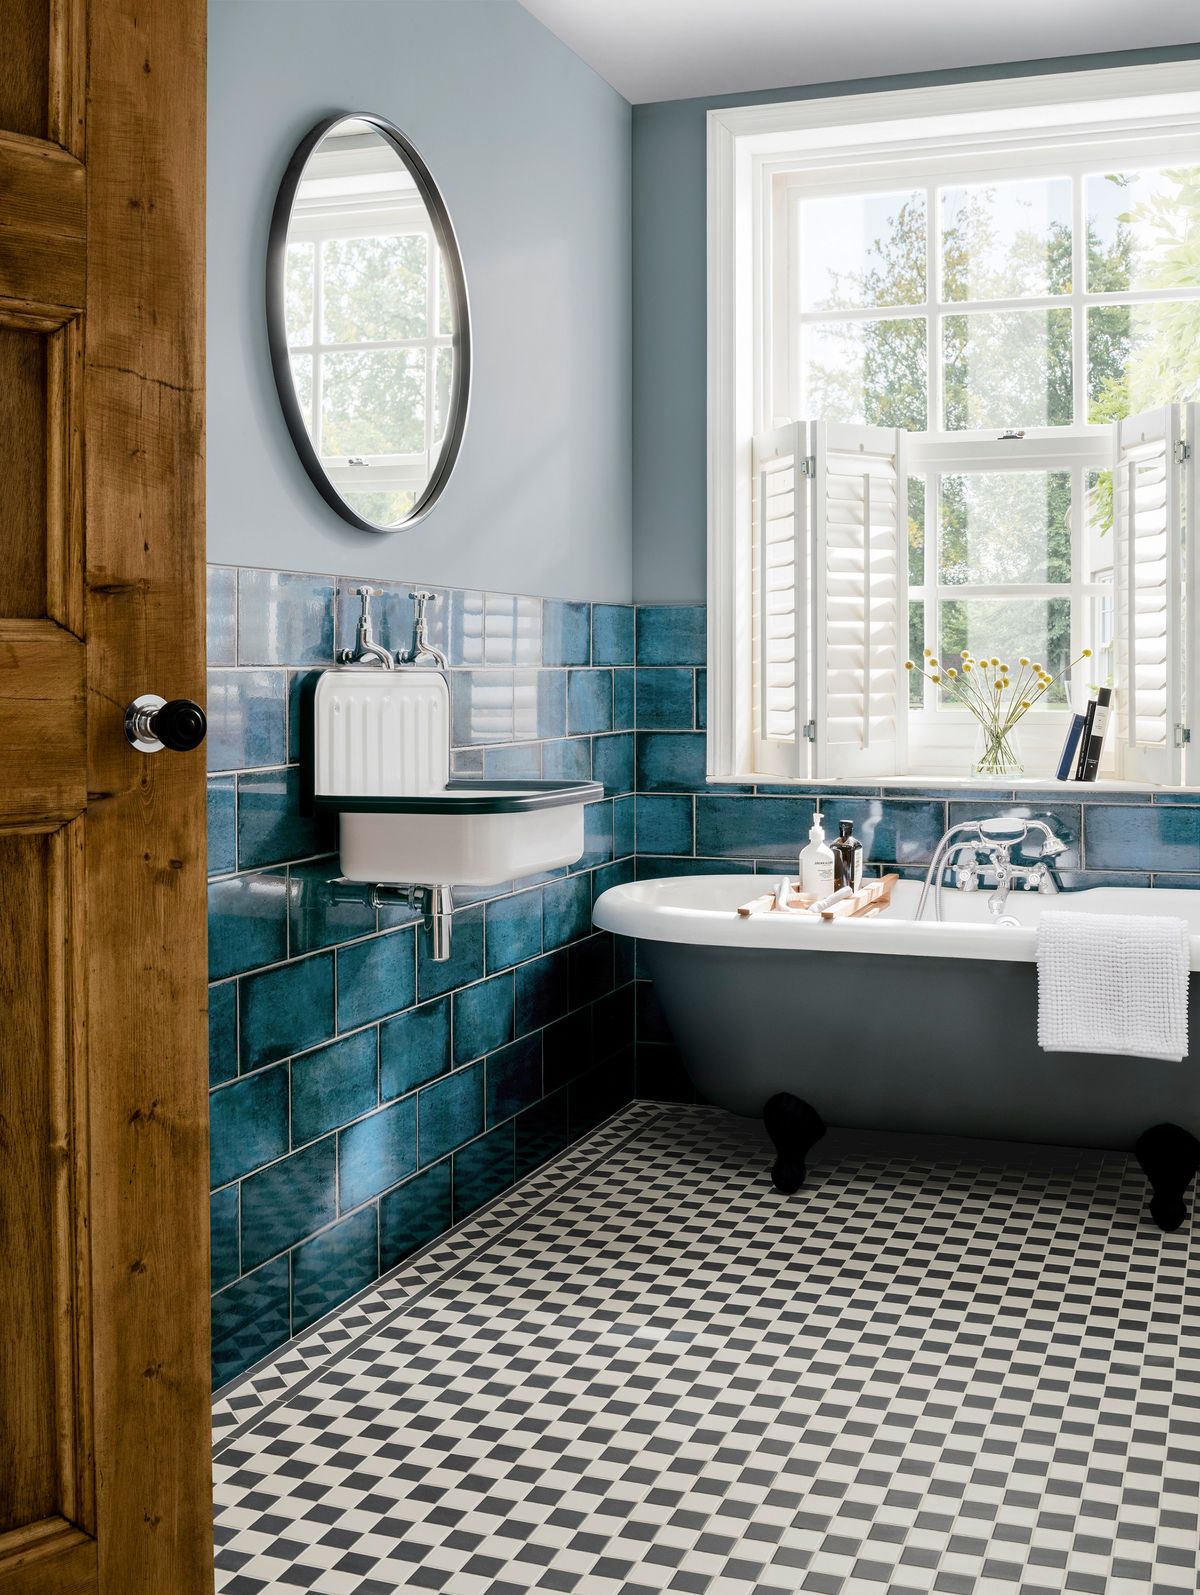 Bathroom floor tiles 12 beautiful ideas to update your space Real Homes